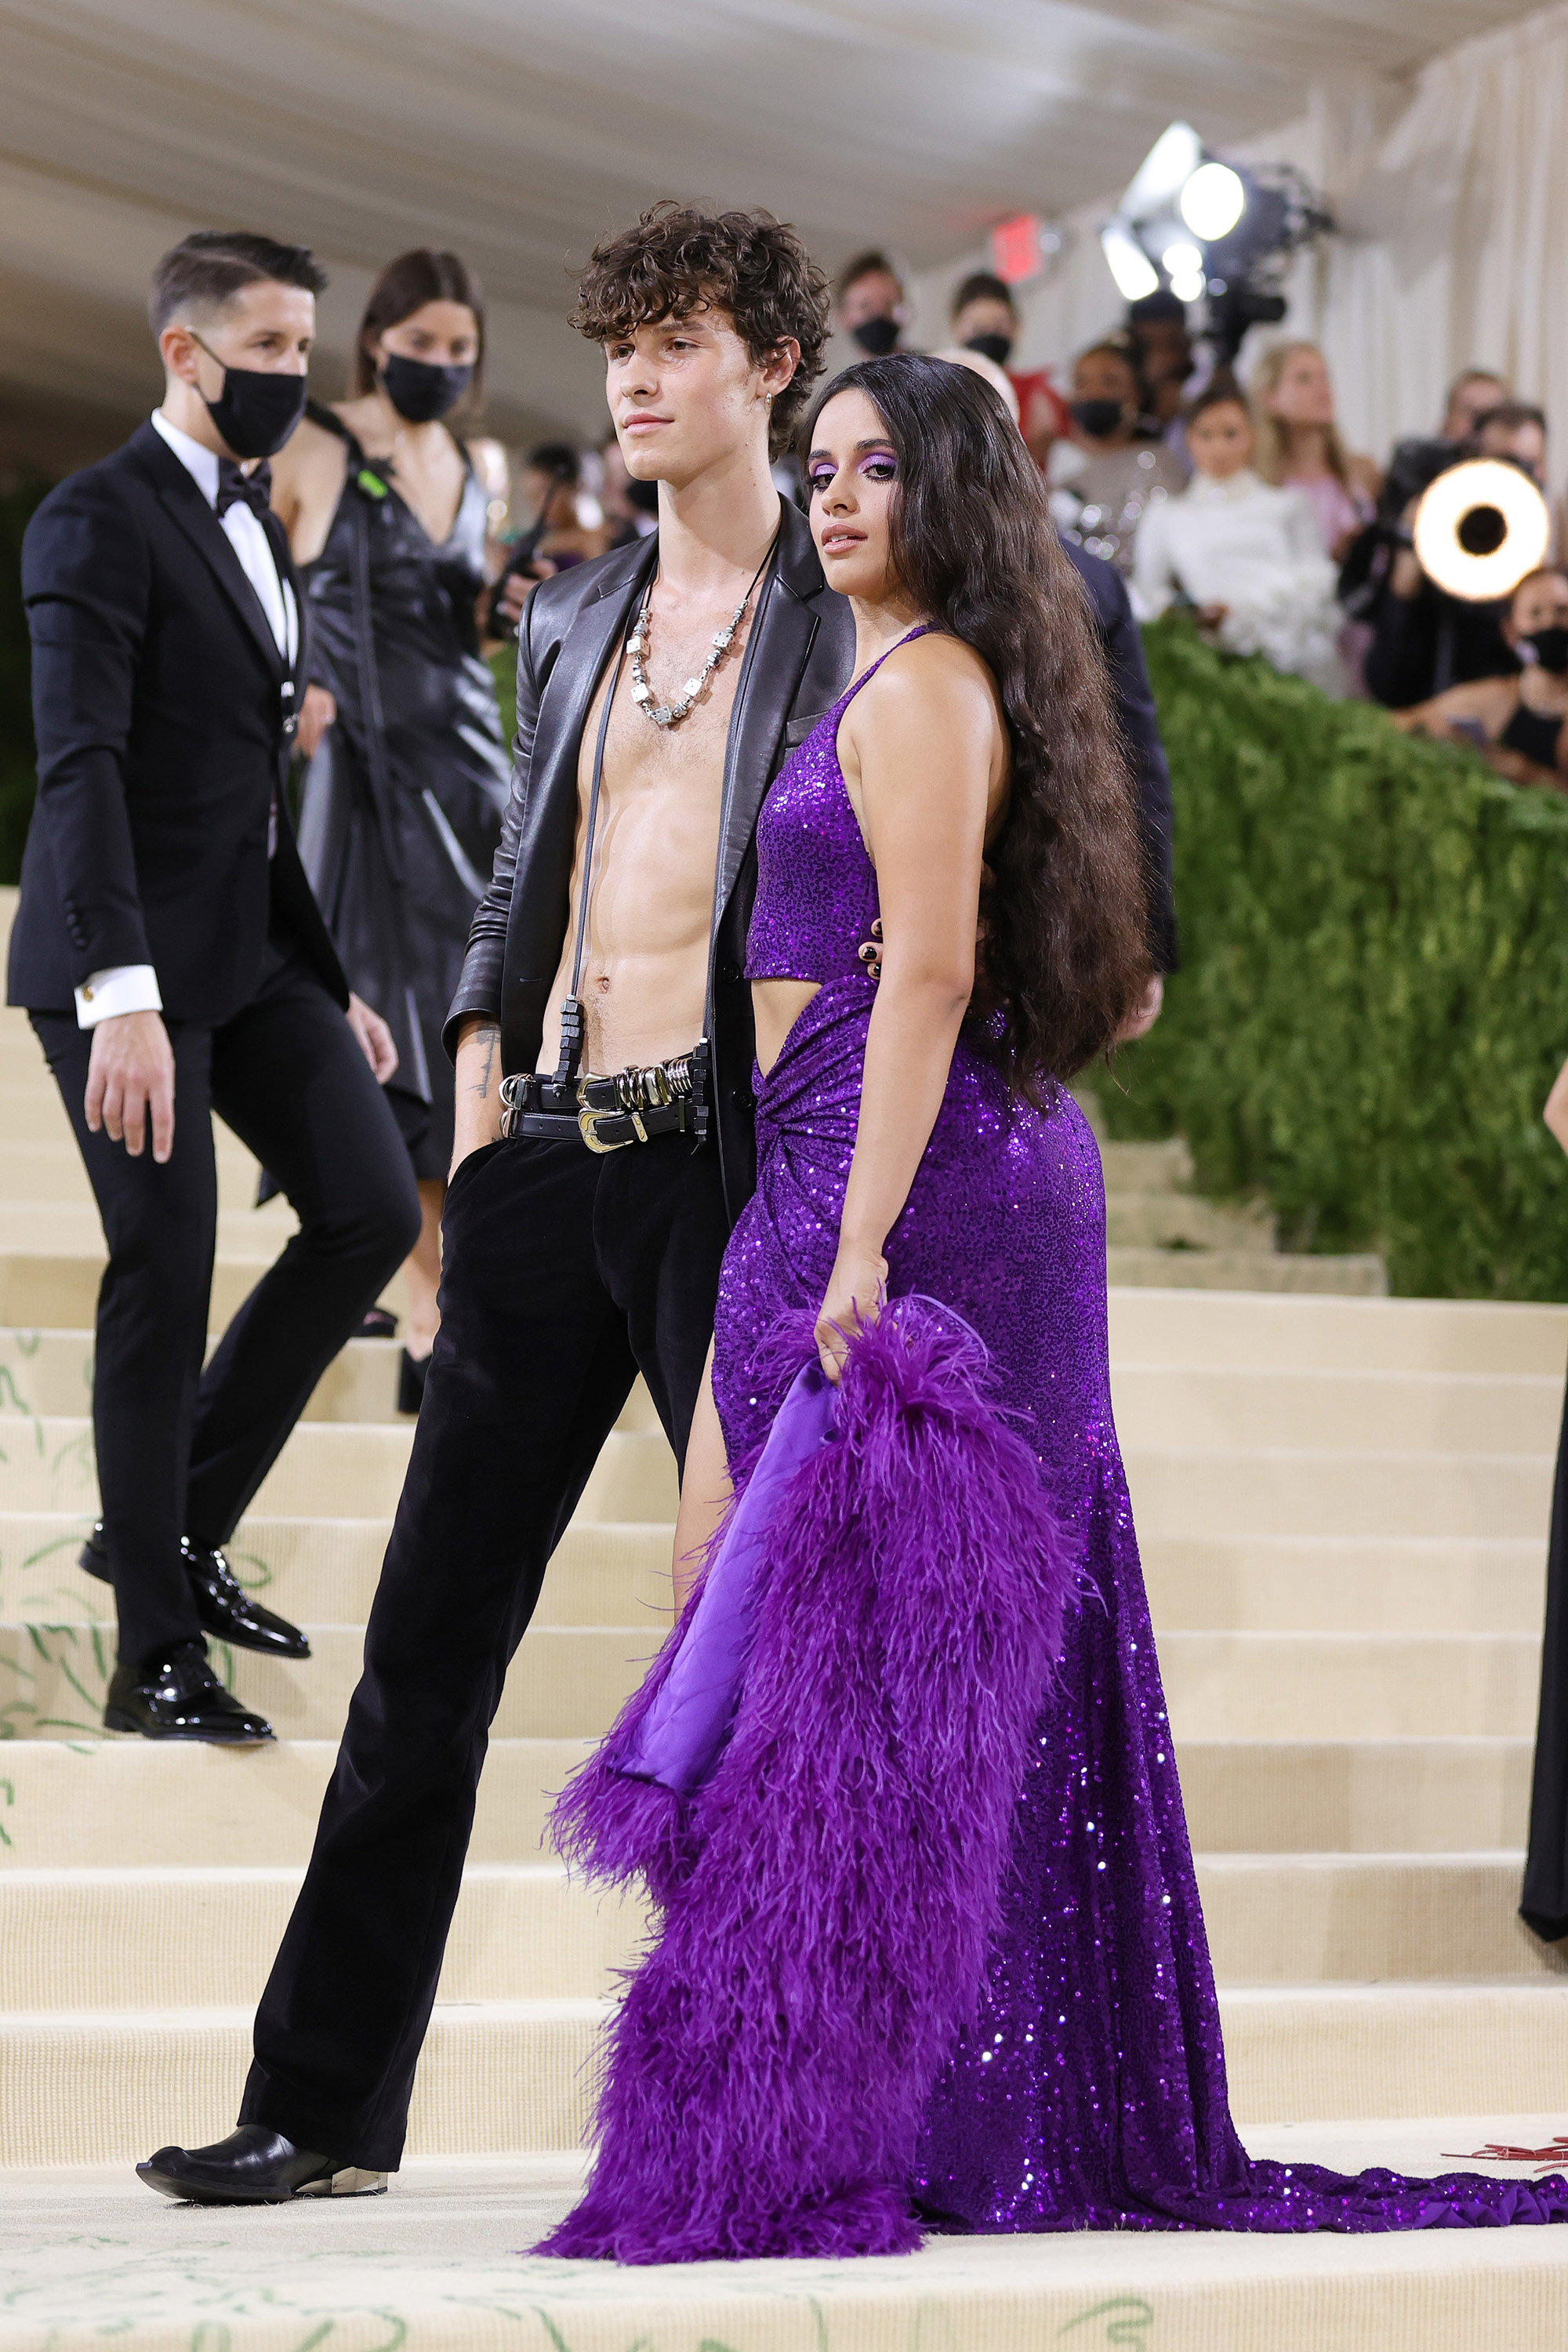 Shawn Mendes and Camila Cabello attend The 2021 Met Gala Celebrating In America: A Lexicon Of Fashion at Metropolitan Museum of Art on Sept. 13, 2021, in New York City.